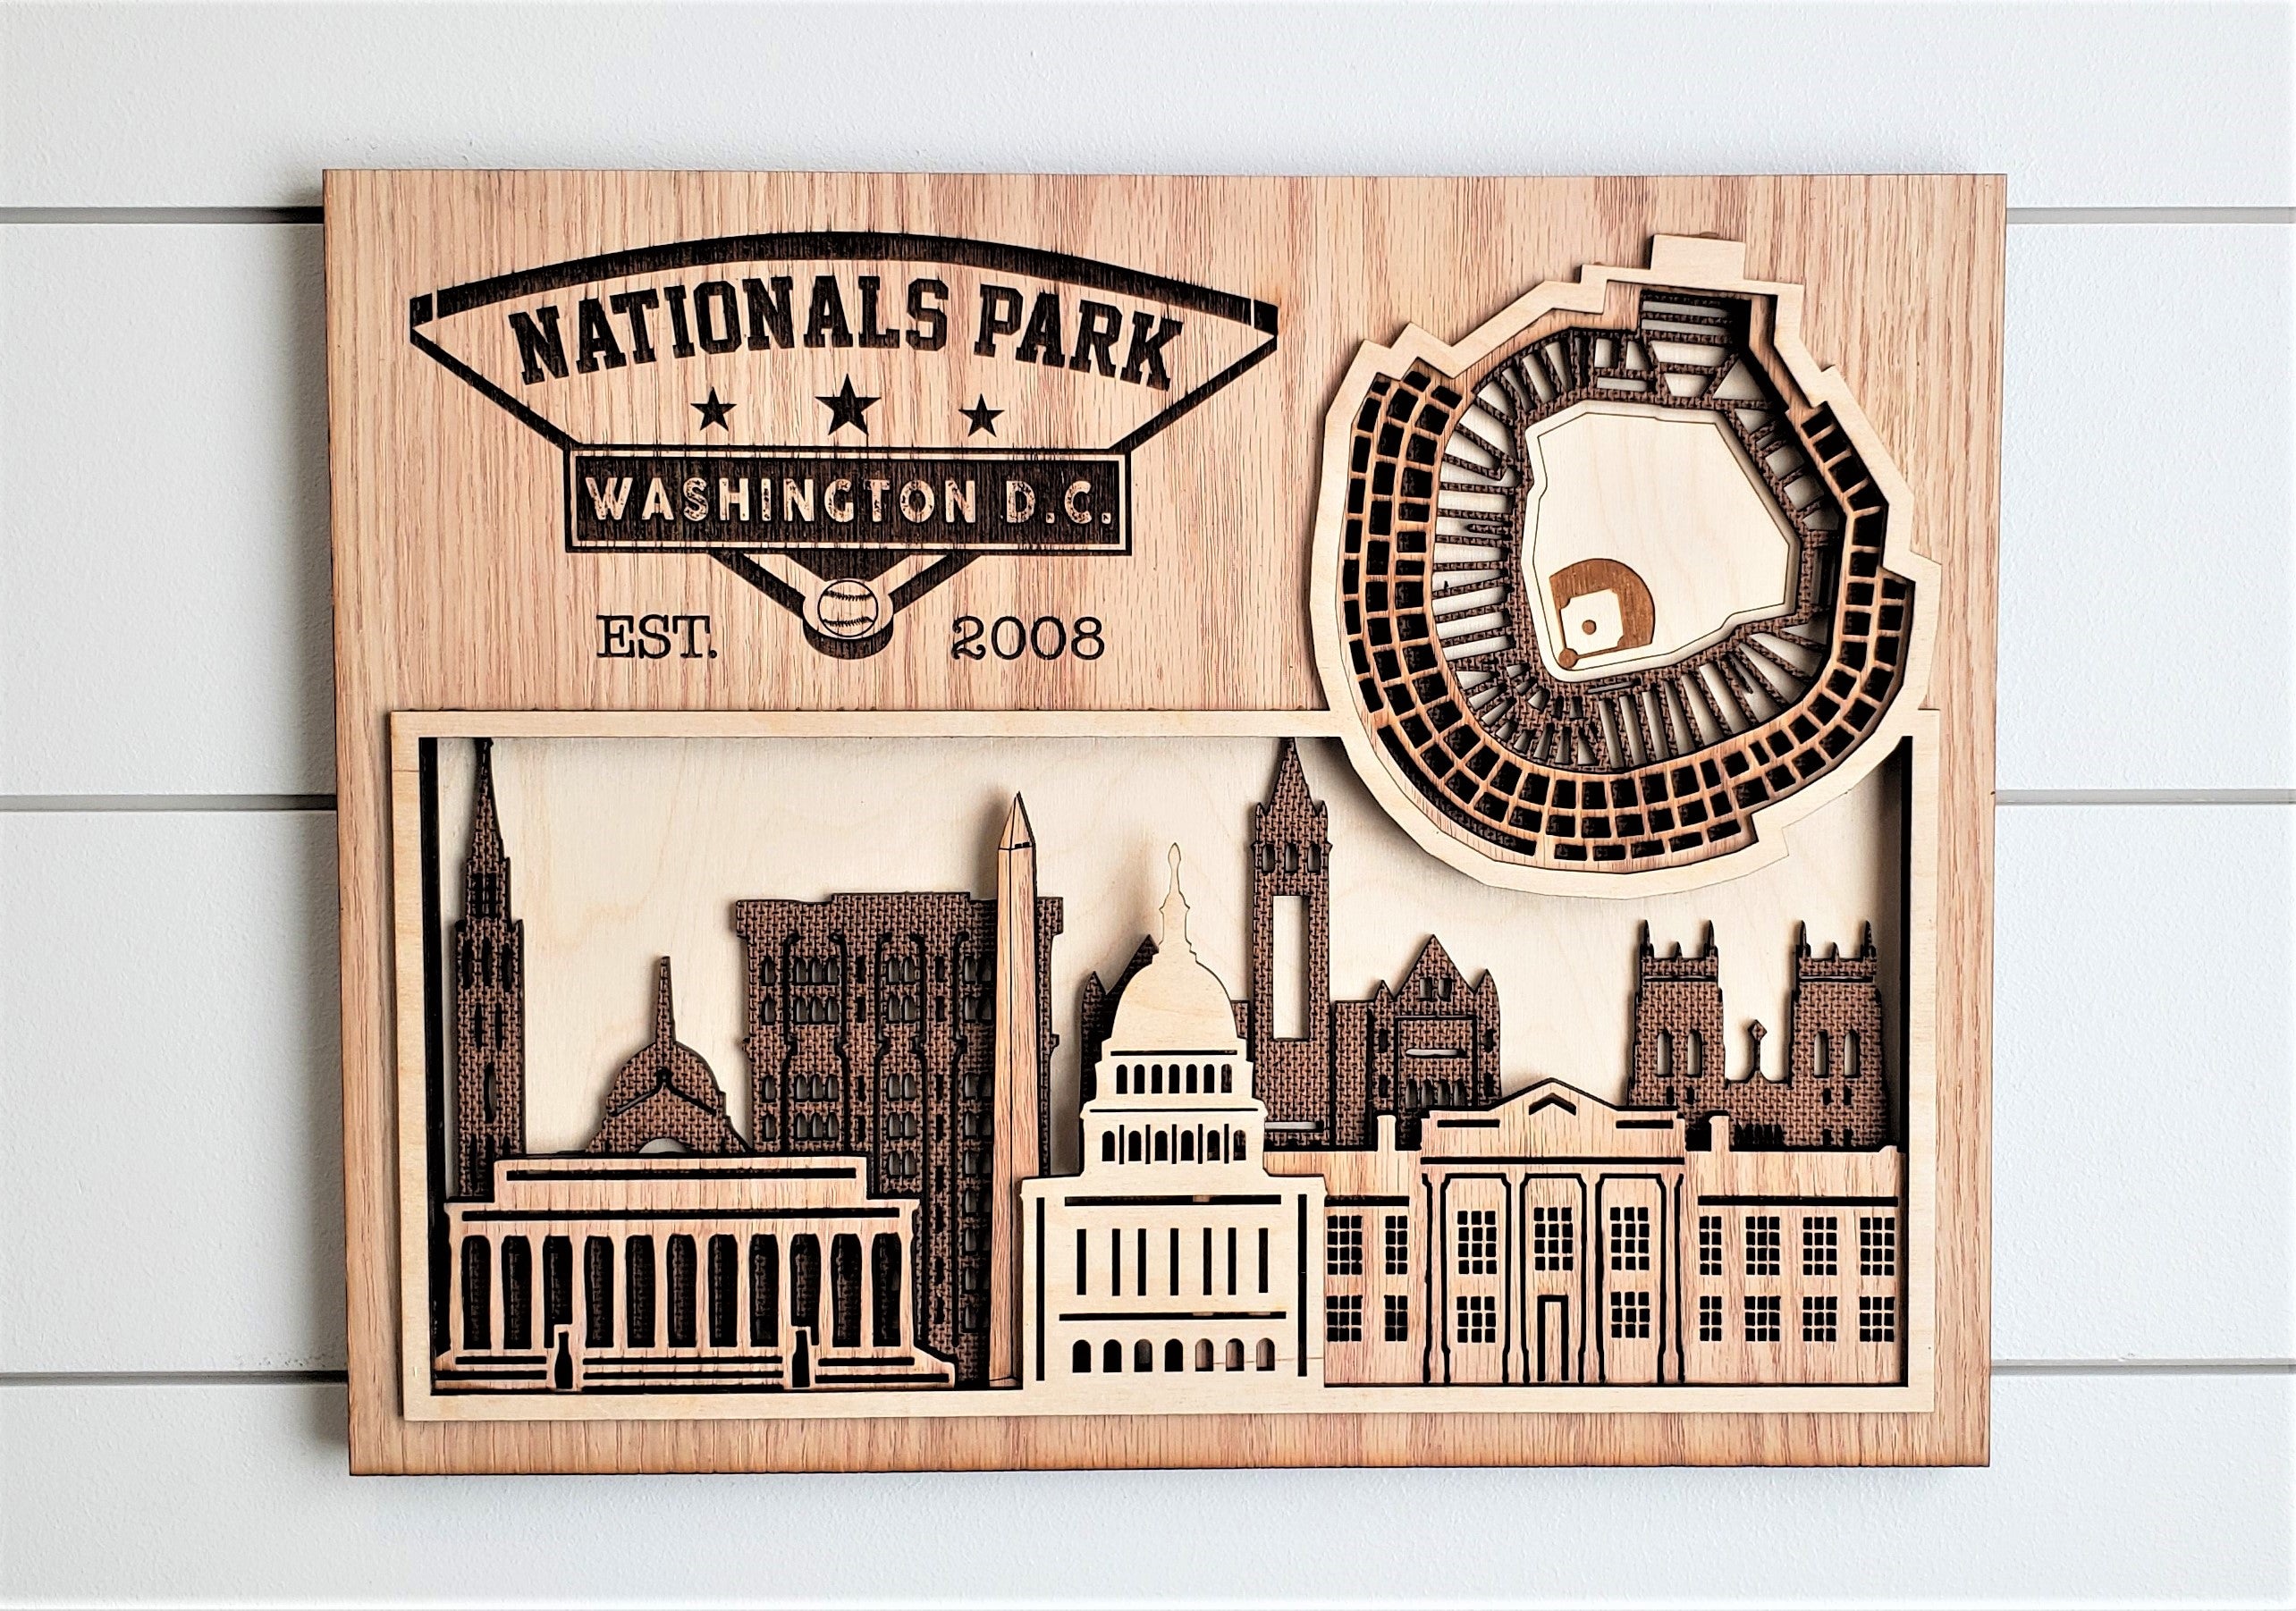 Nationals Park - Home of the Washington Nationals